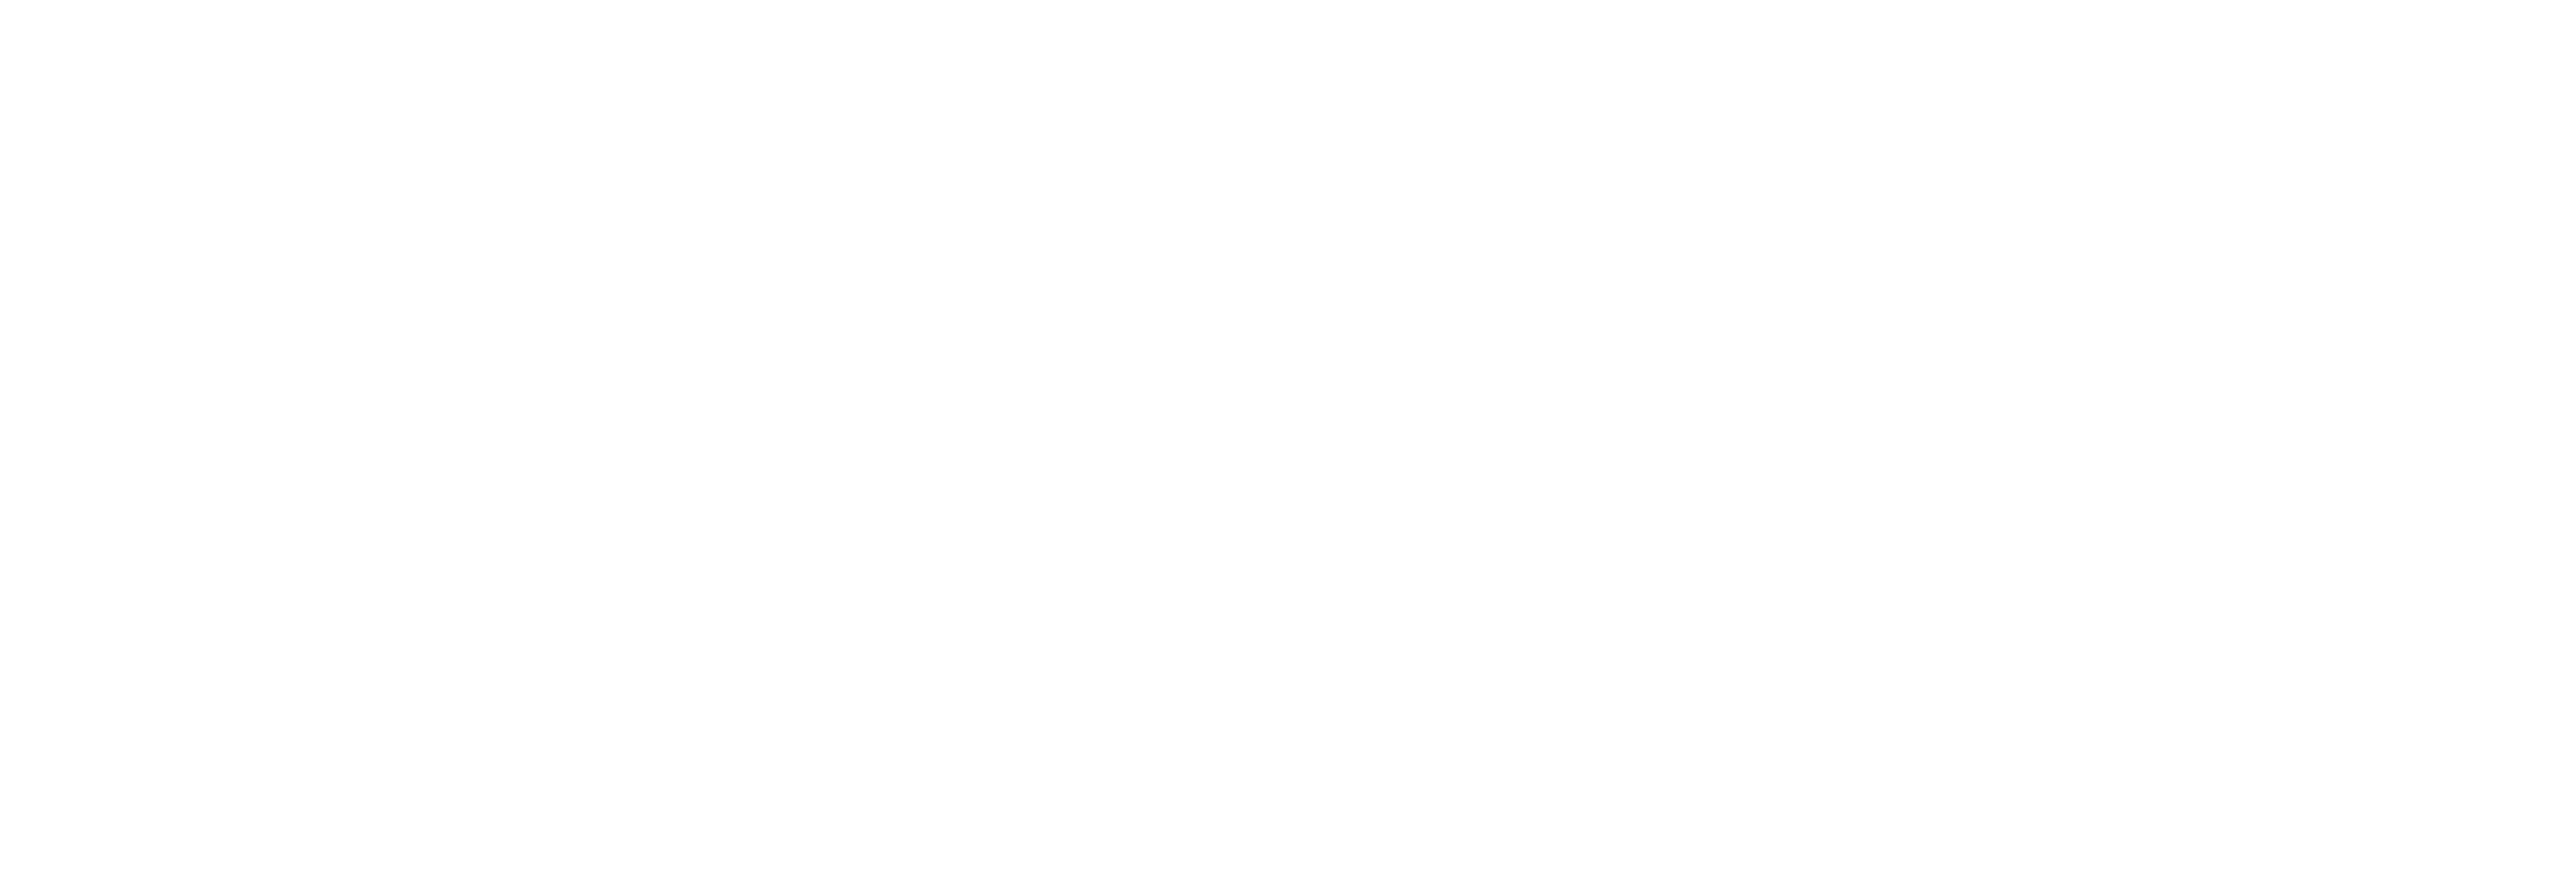 Oñati International Institute for the Sociology of Law